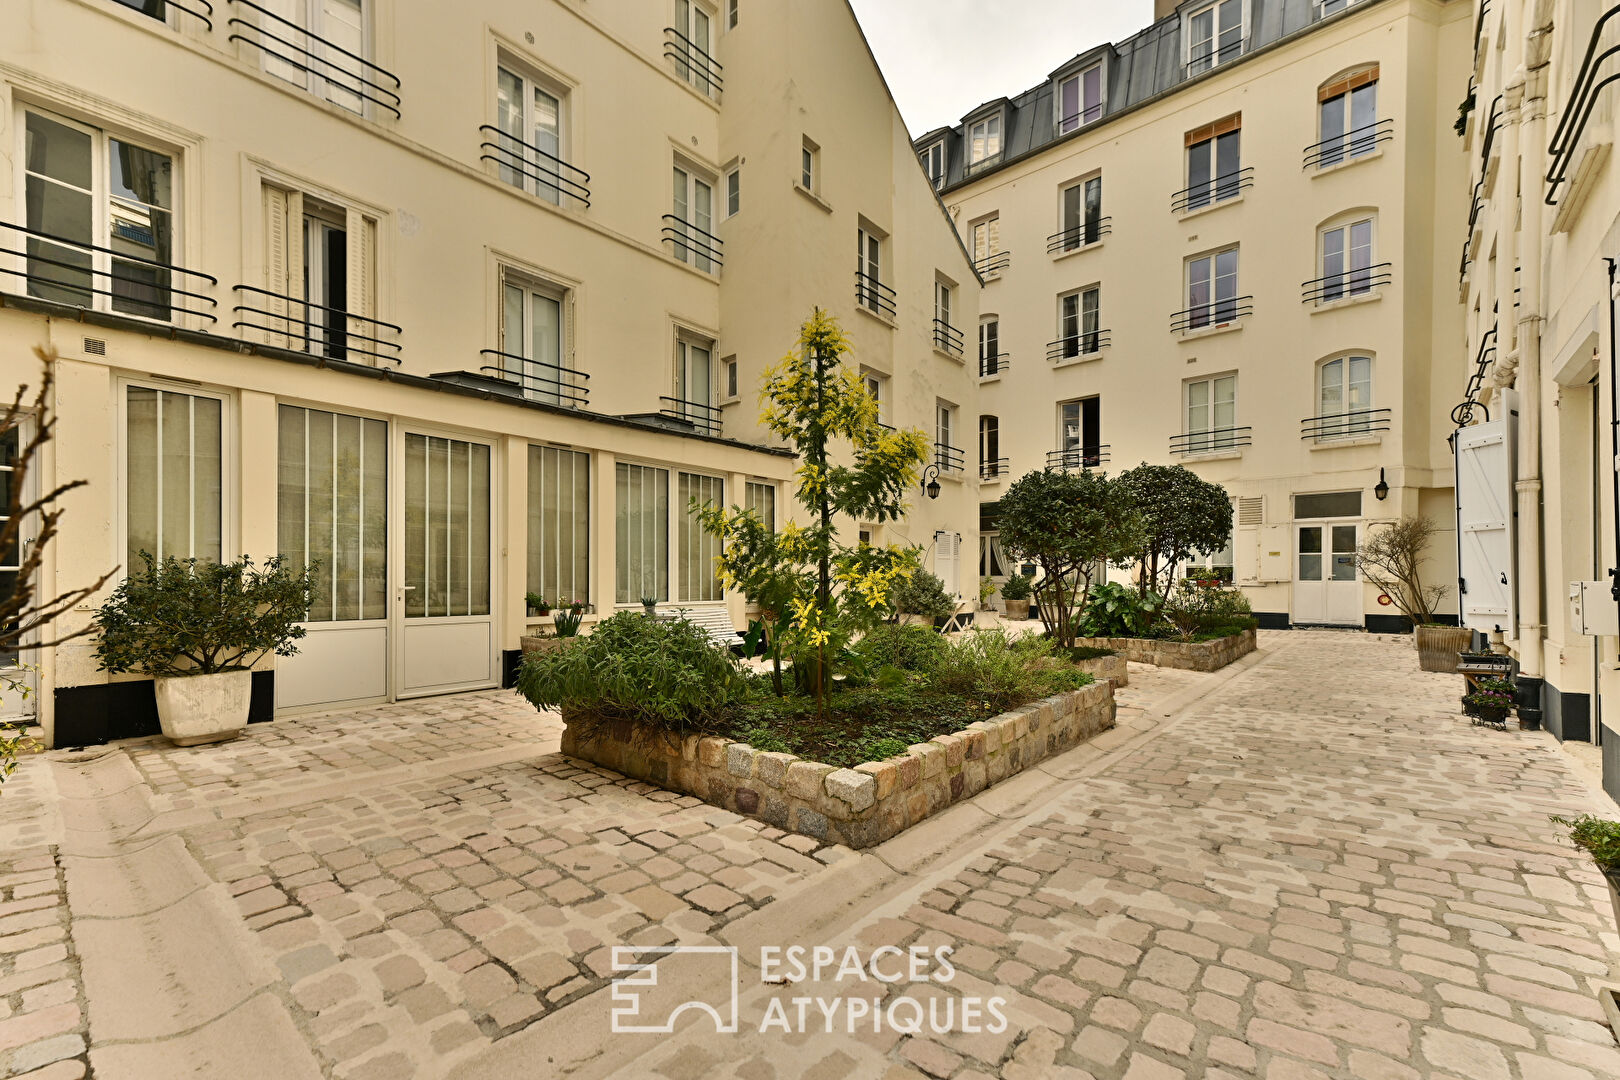 Gros-Caillou district, Invalides, duplex family apartment overlooking garden